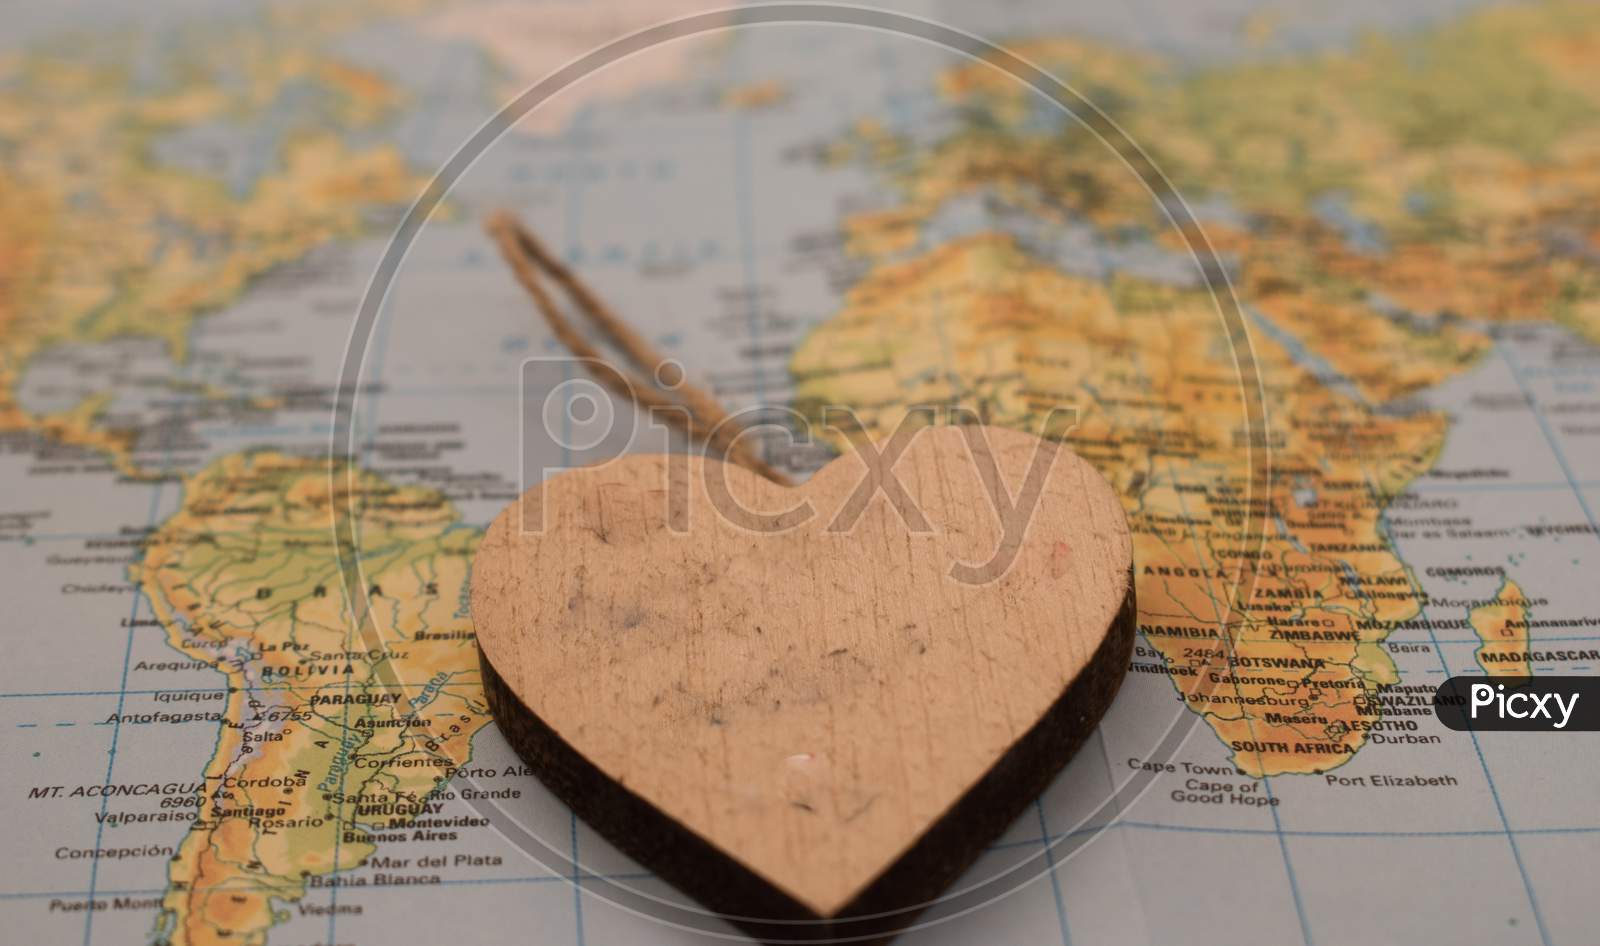 A Wooden Heart Over A Global Map